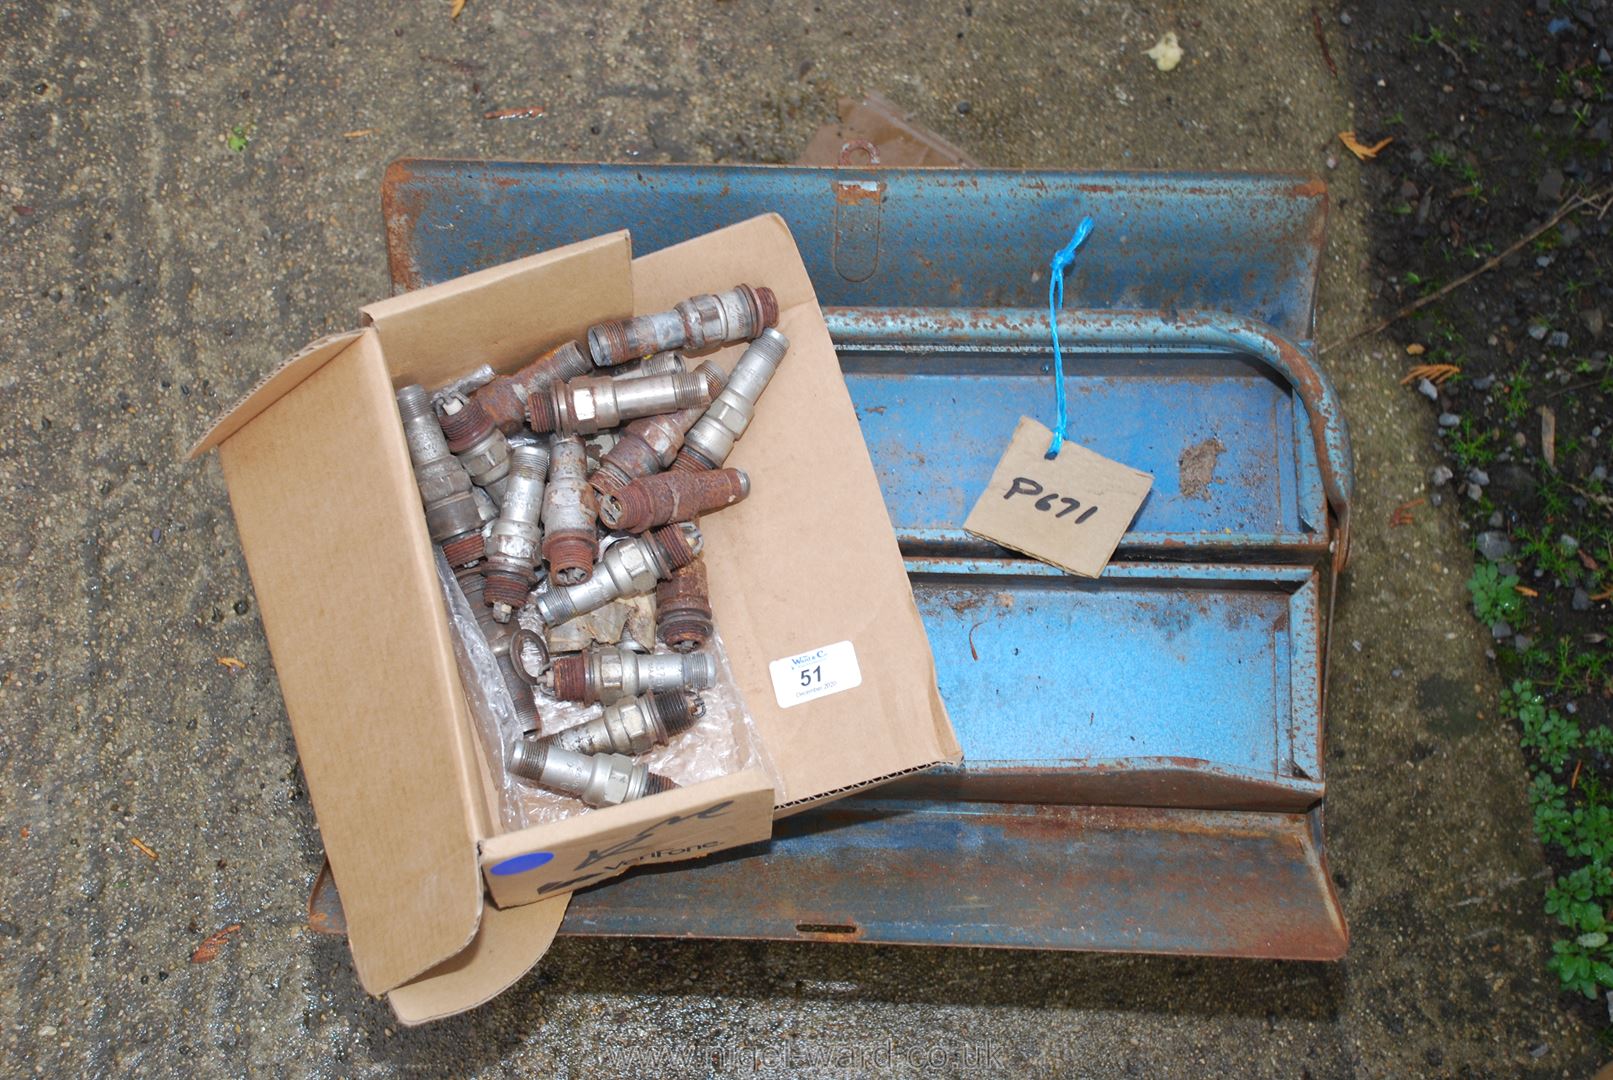 A Metal toolbox and spark plugs, possibly waterproof/ex-military vehicle.